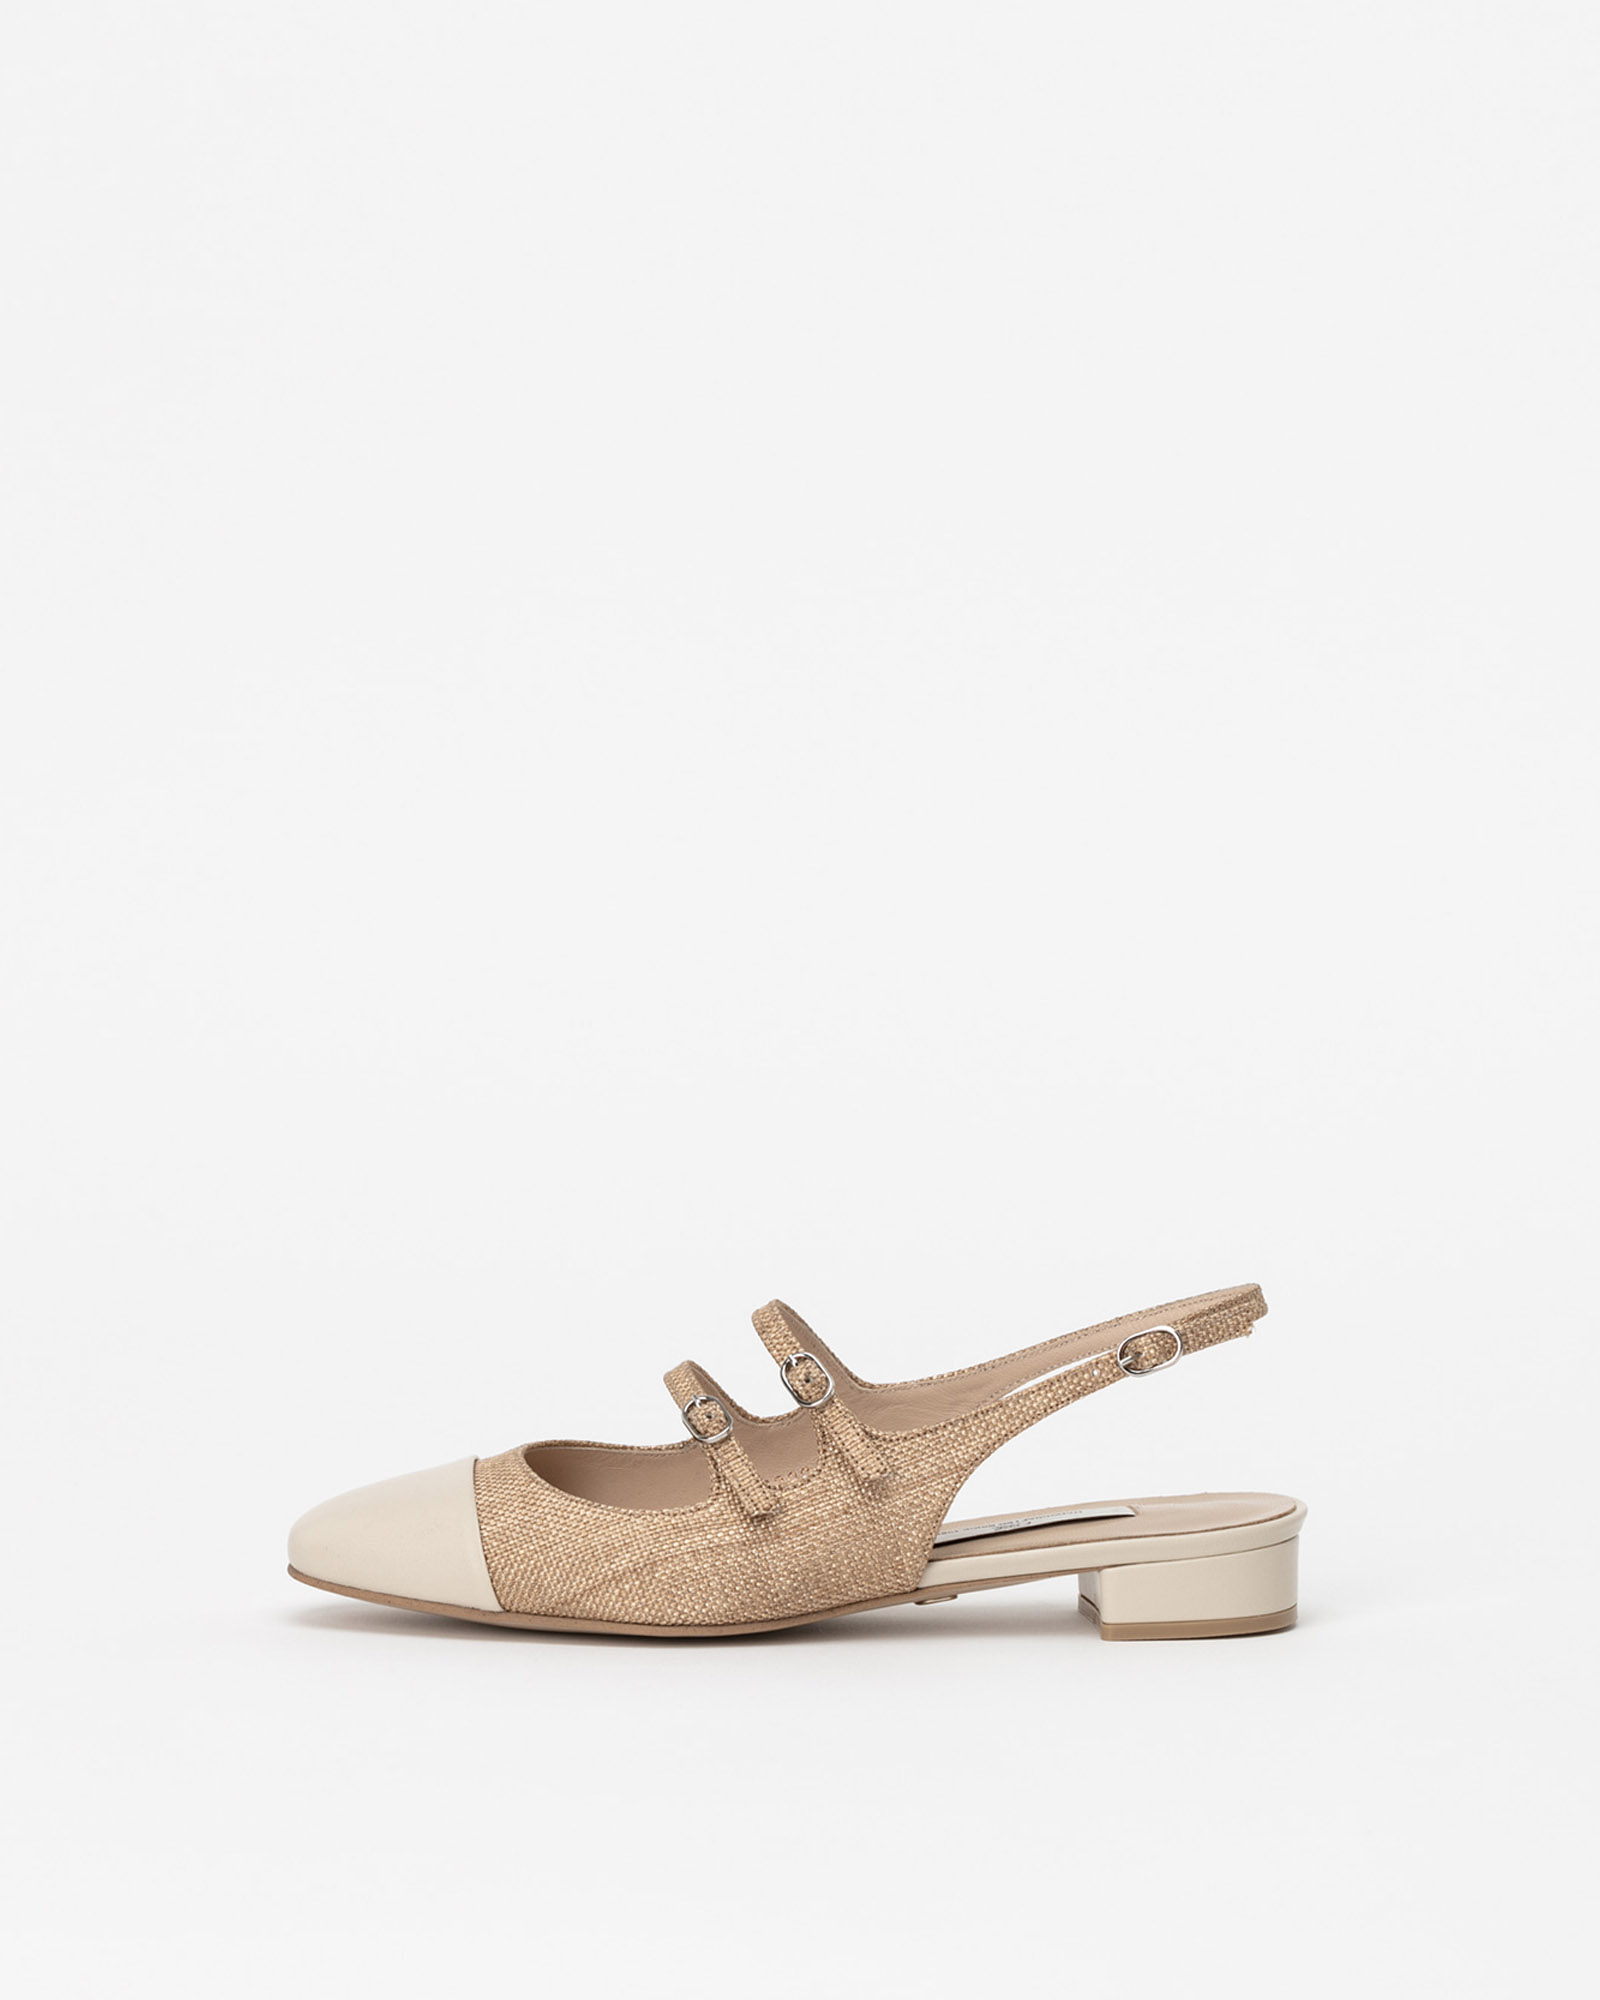 Crescin Maryjane Slingback Flat shoes in Natural Straw with Ivory Toe